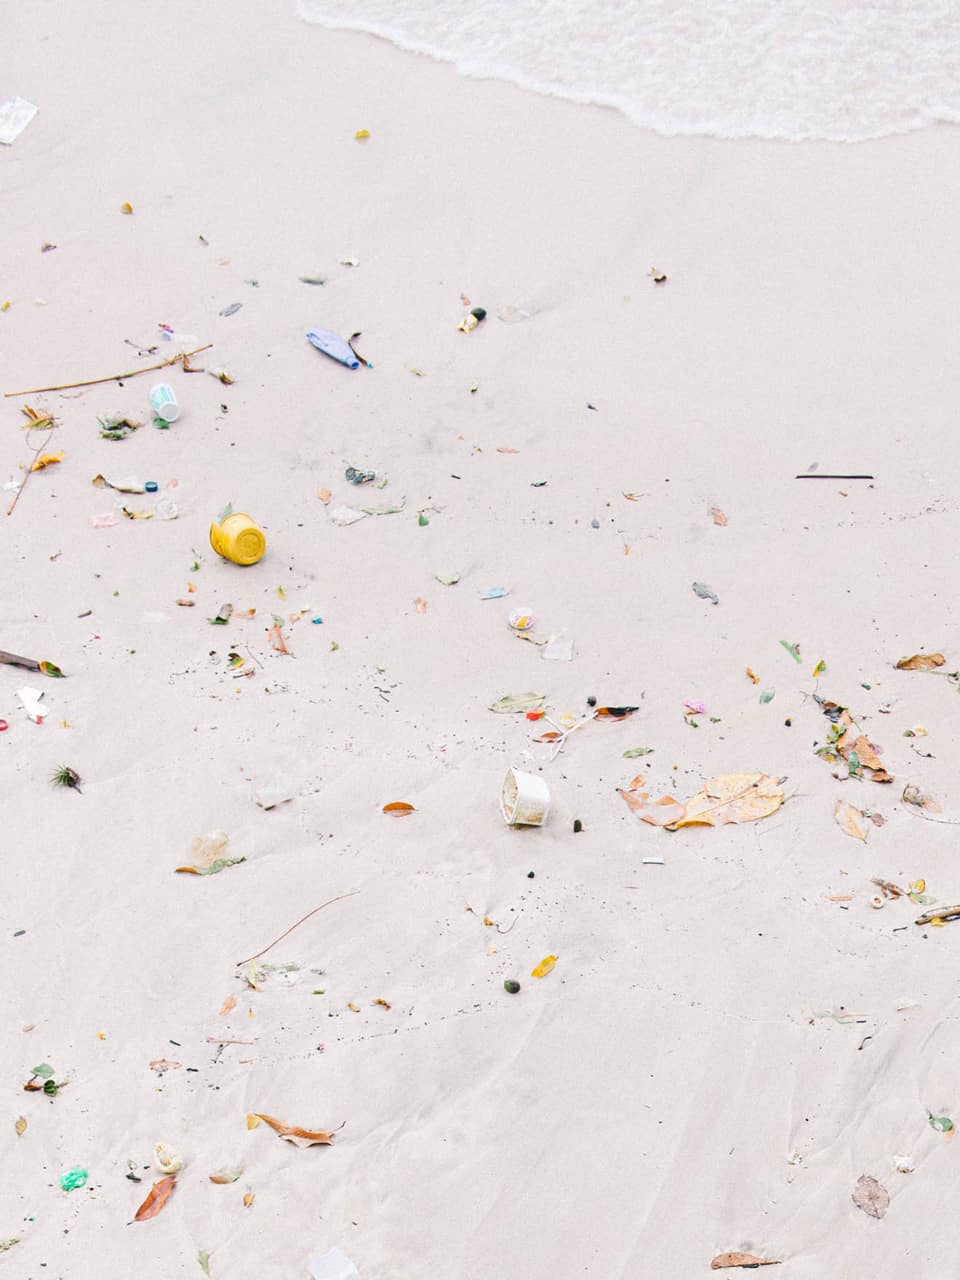 Trash washed up on the shore in Rio de Janeiro